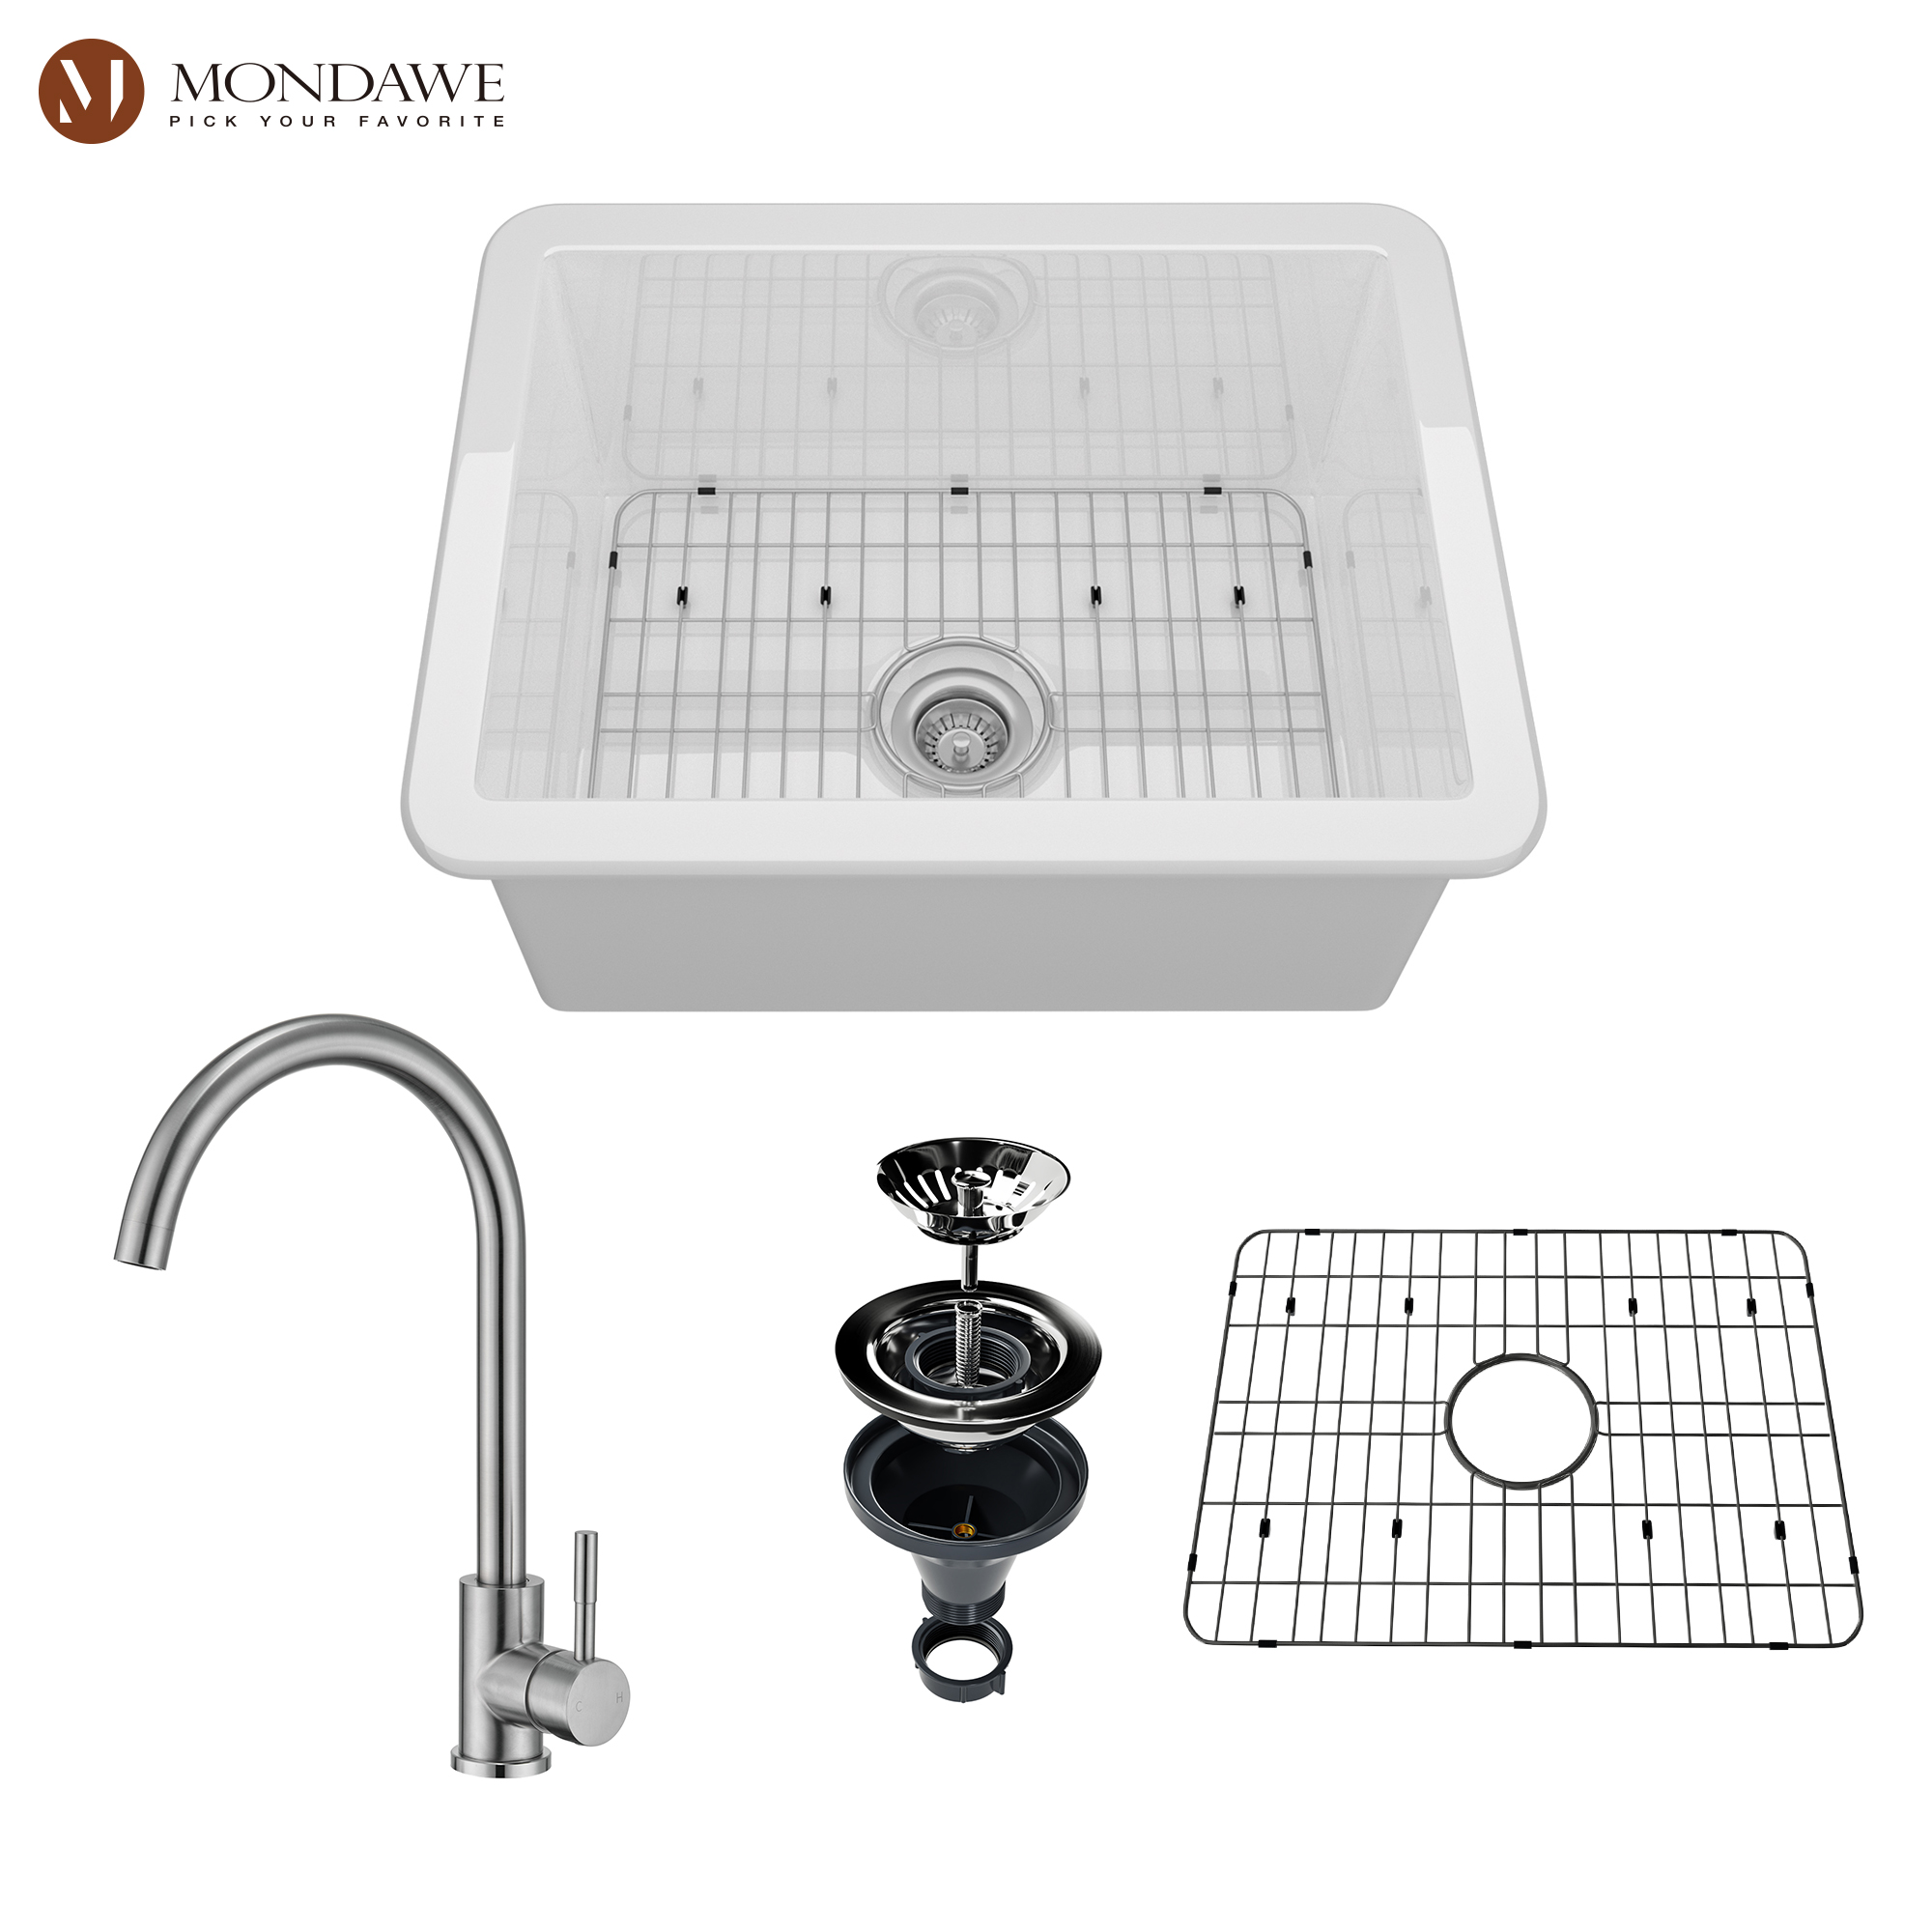 Undermount 24 in. single bowl fireclay kitchen sink in white comes with high-arc kitchen faucet-Arrisea